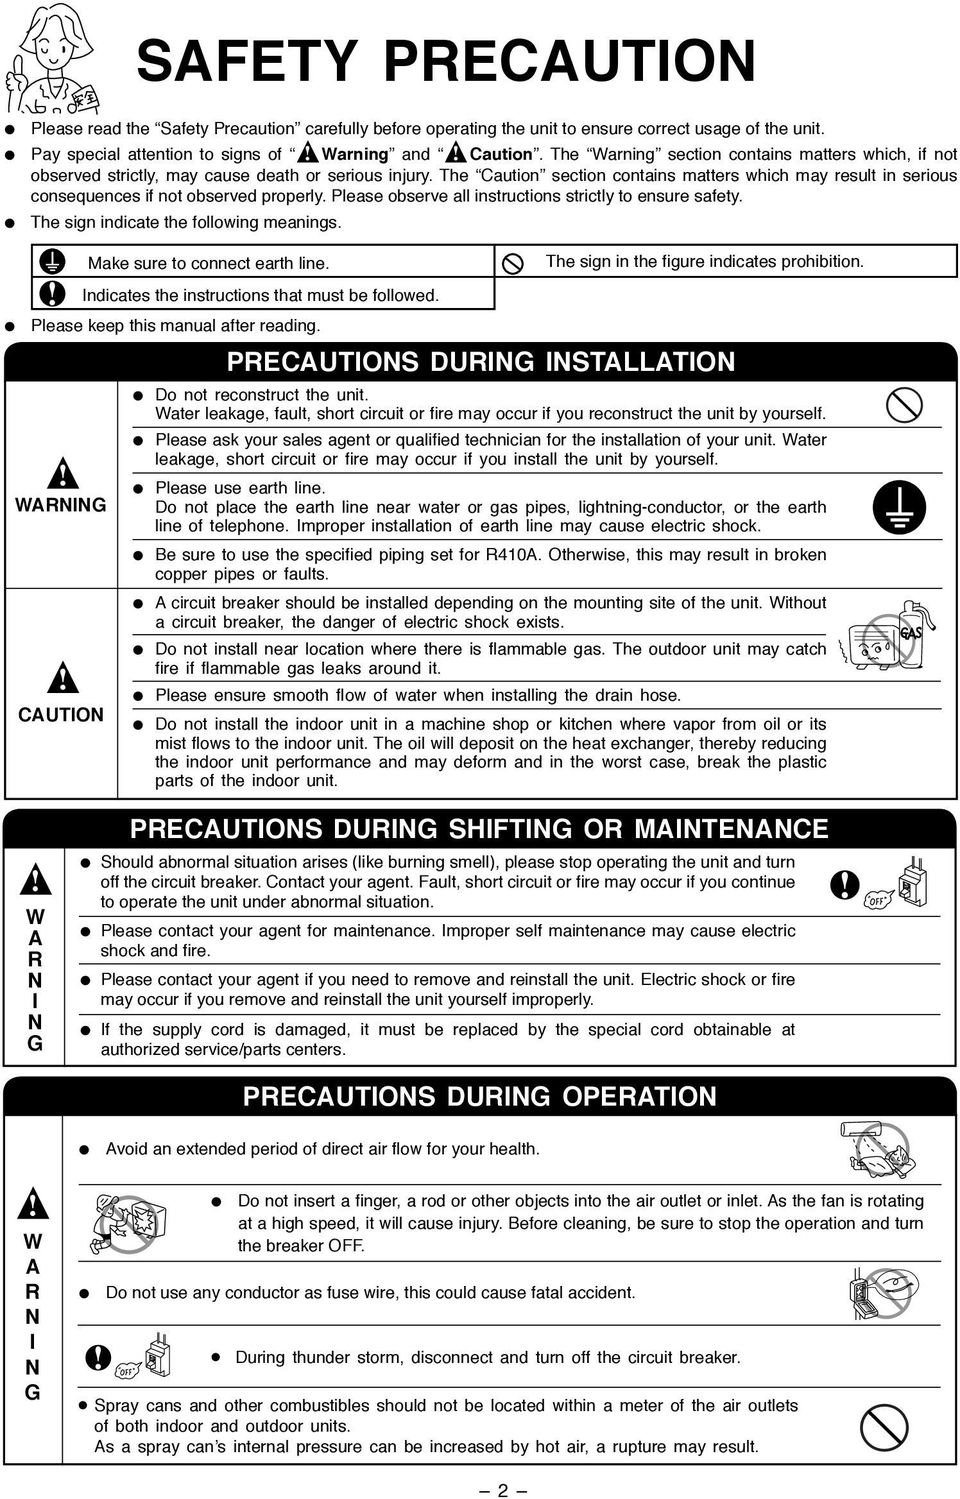 The Caution section contains matters which may result in serious consequences if not observed properly. Please observe all instructions strictly to ensure safety.